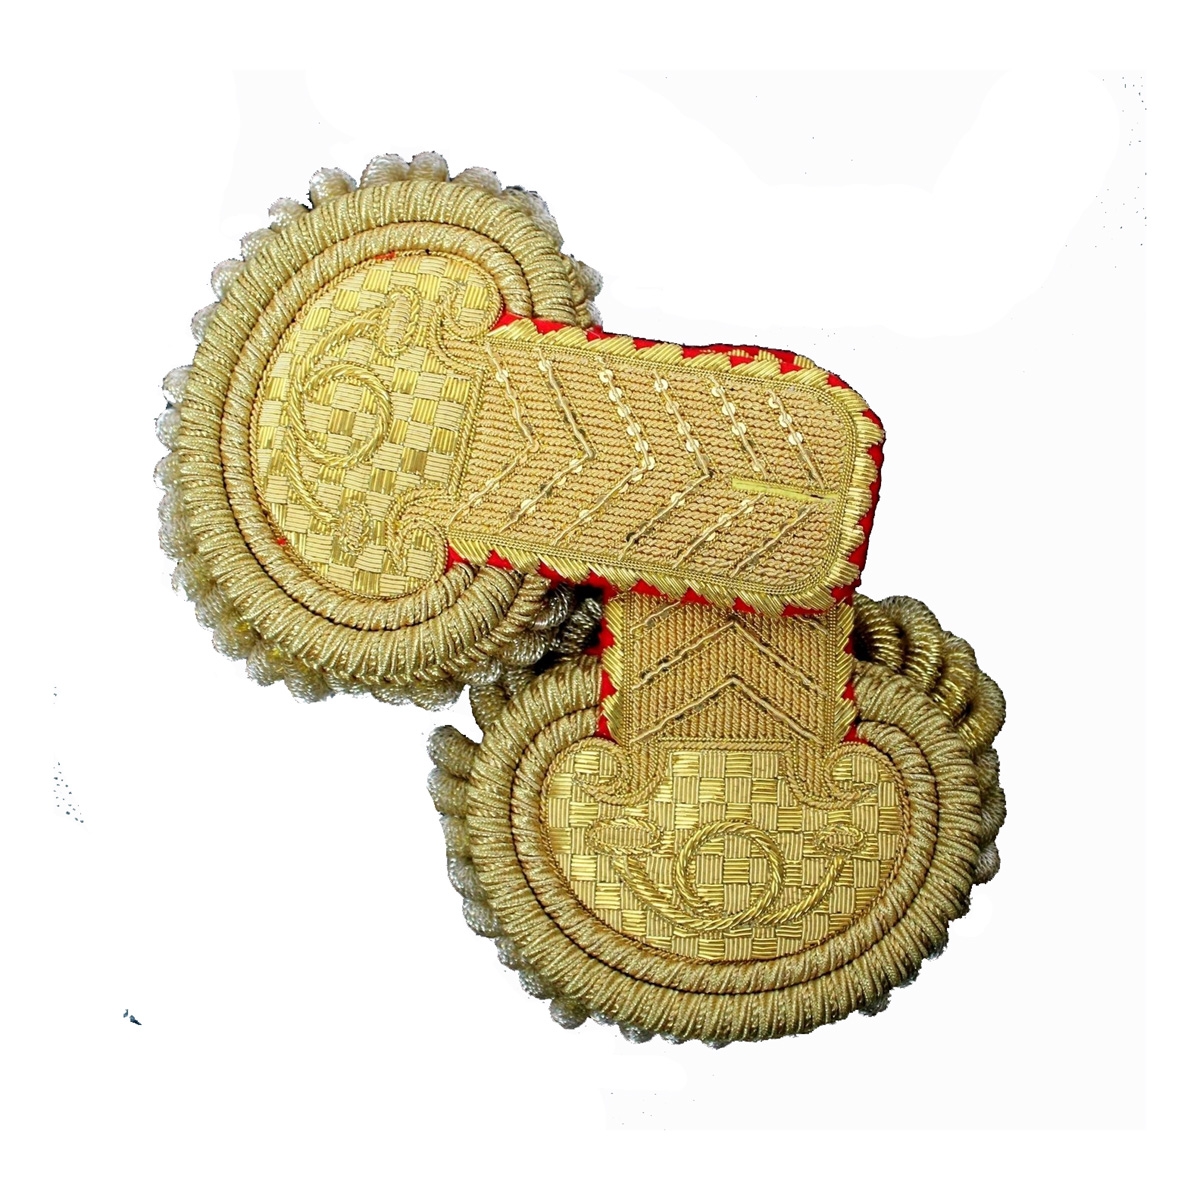 Epaulettes for colonel gold and red color hand embroidery bullion wire